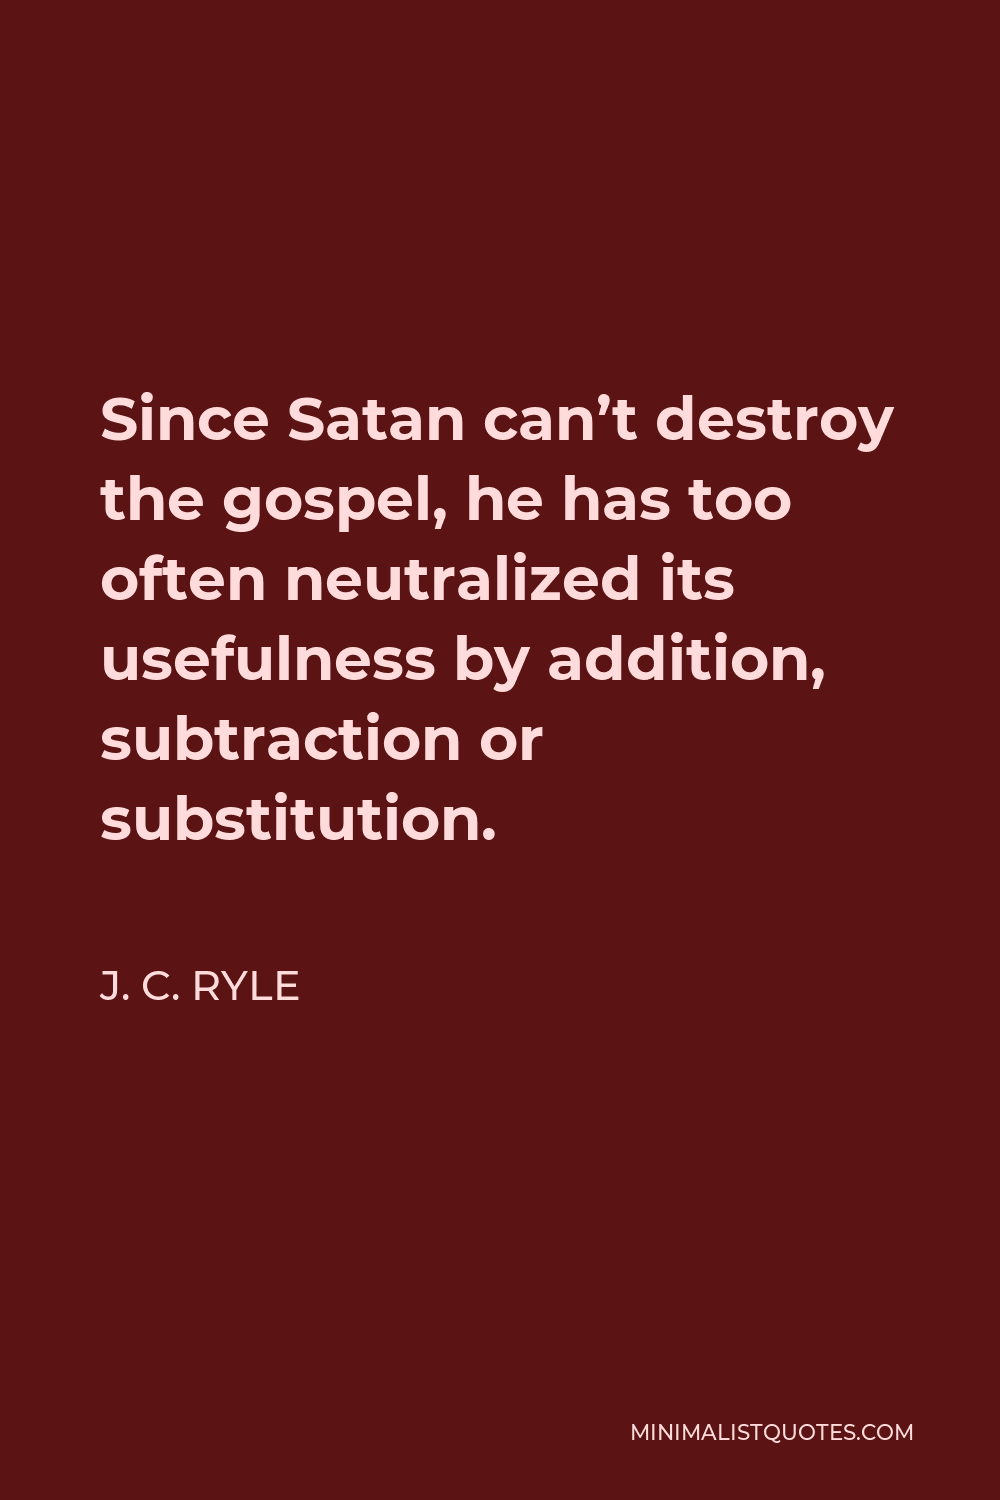 J. C. Ryle Quote - Since Satan can’t destroy the gospel, he has too often neutralized its usefulness by addition, subtraction or substitution.